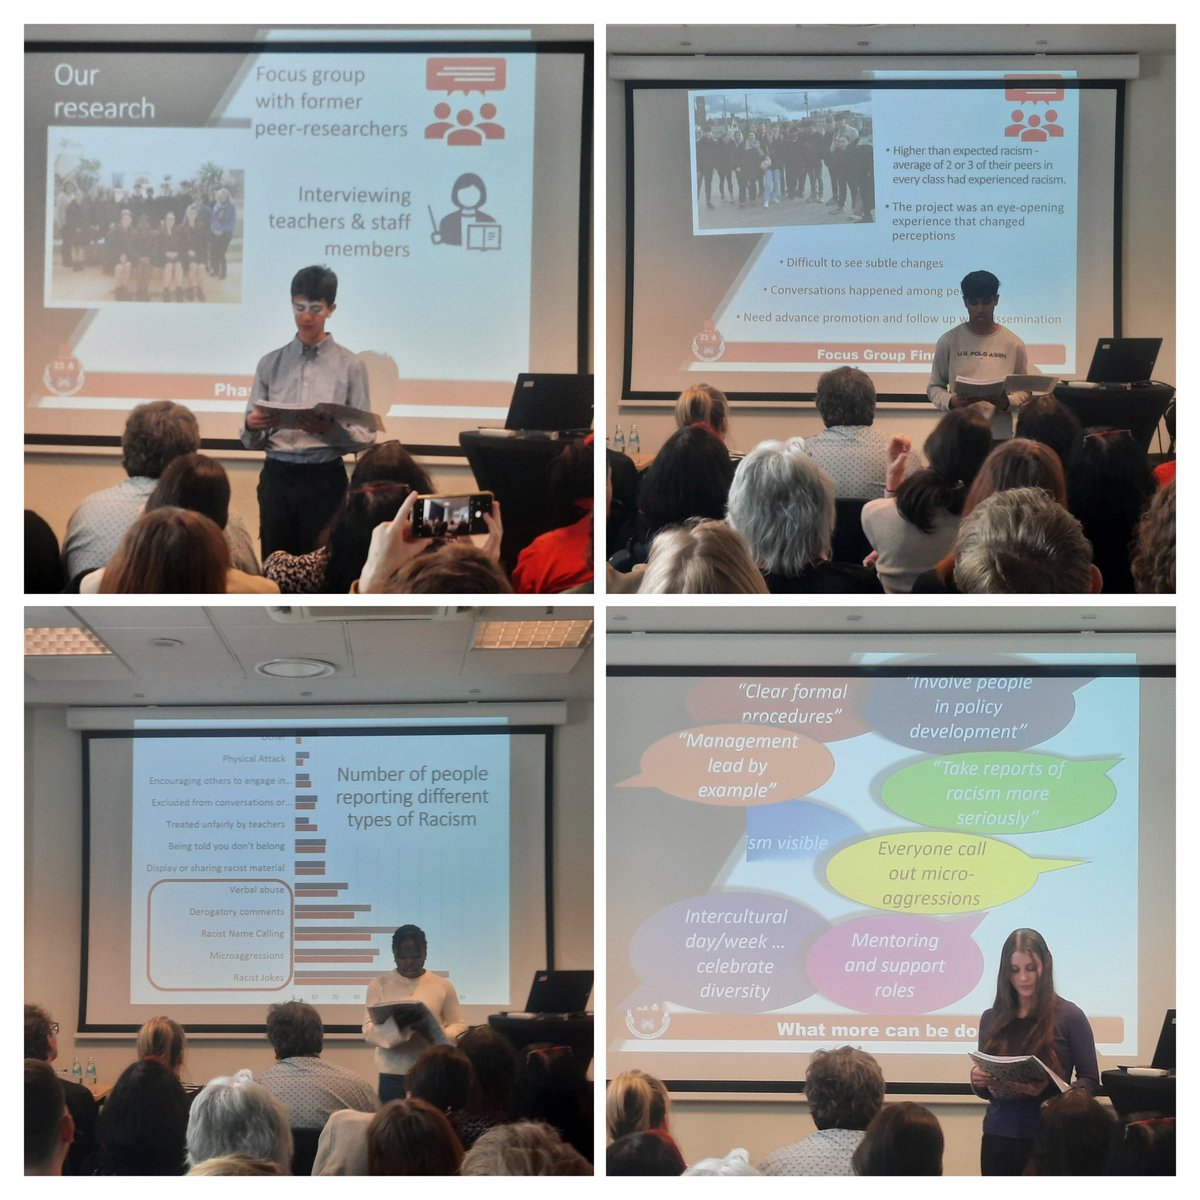 Blown away by @wesleycollege students' presentation on 'Starting a conversation about racism'- inspiring project! Well done @ElaineMRWilson @NiamhatMU @UCDSocialPWJ for your trailblazing work #ecswr24